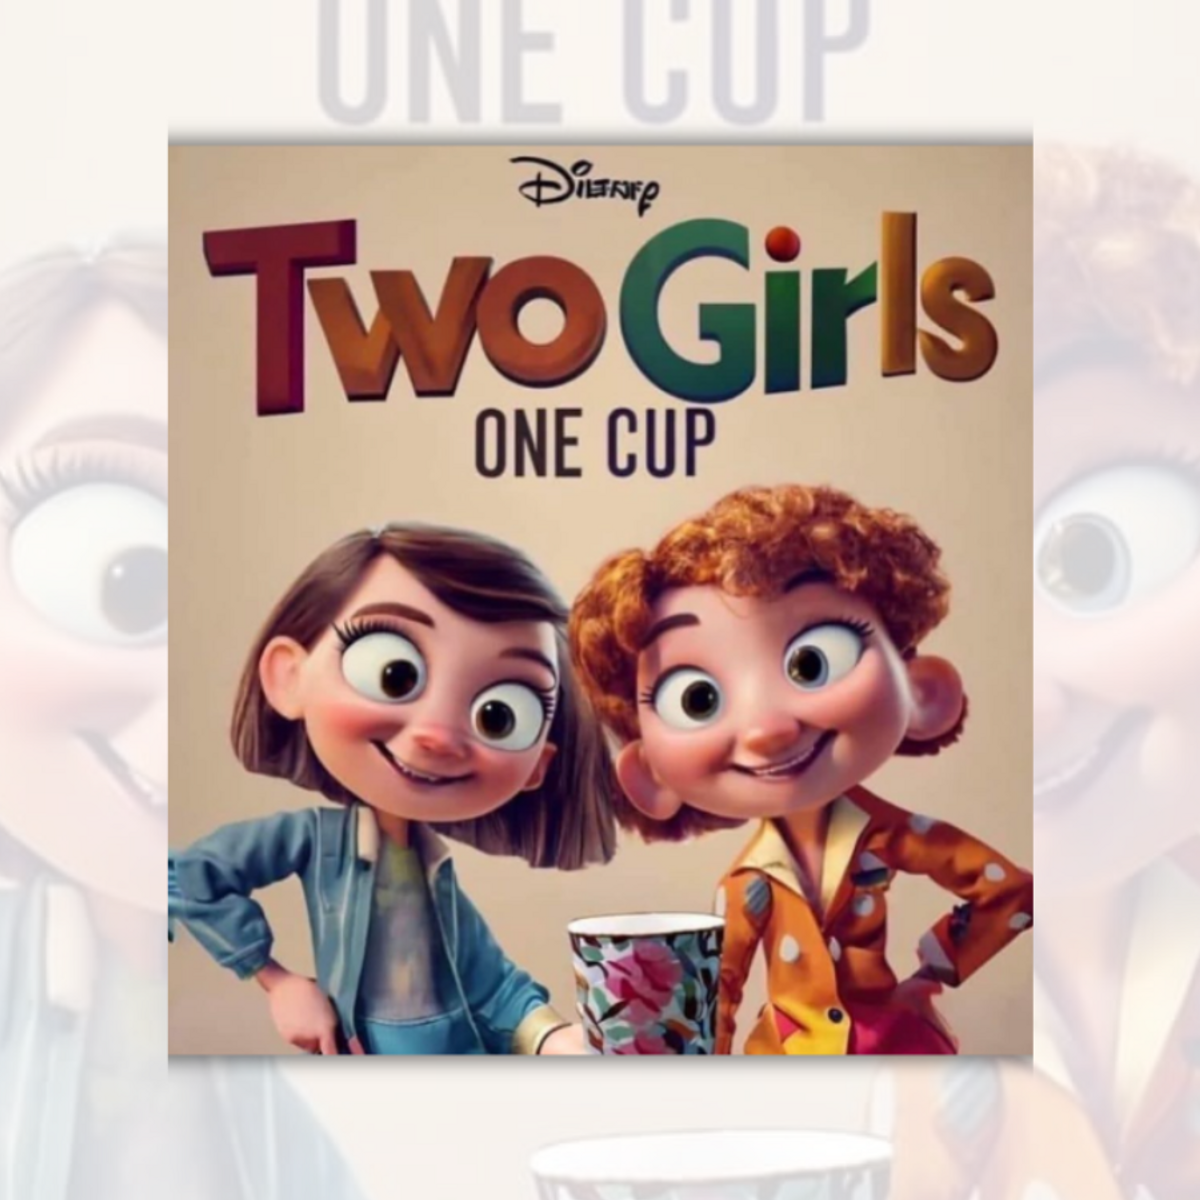 Sneak Peek at Poster for Upcoming Disney Film 'Two Girls, One Cup'? |  Snopes.com